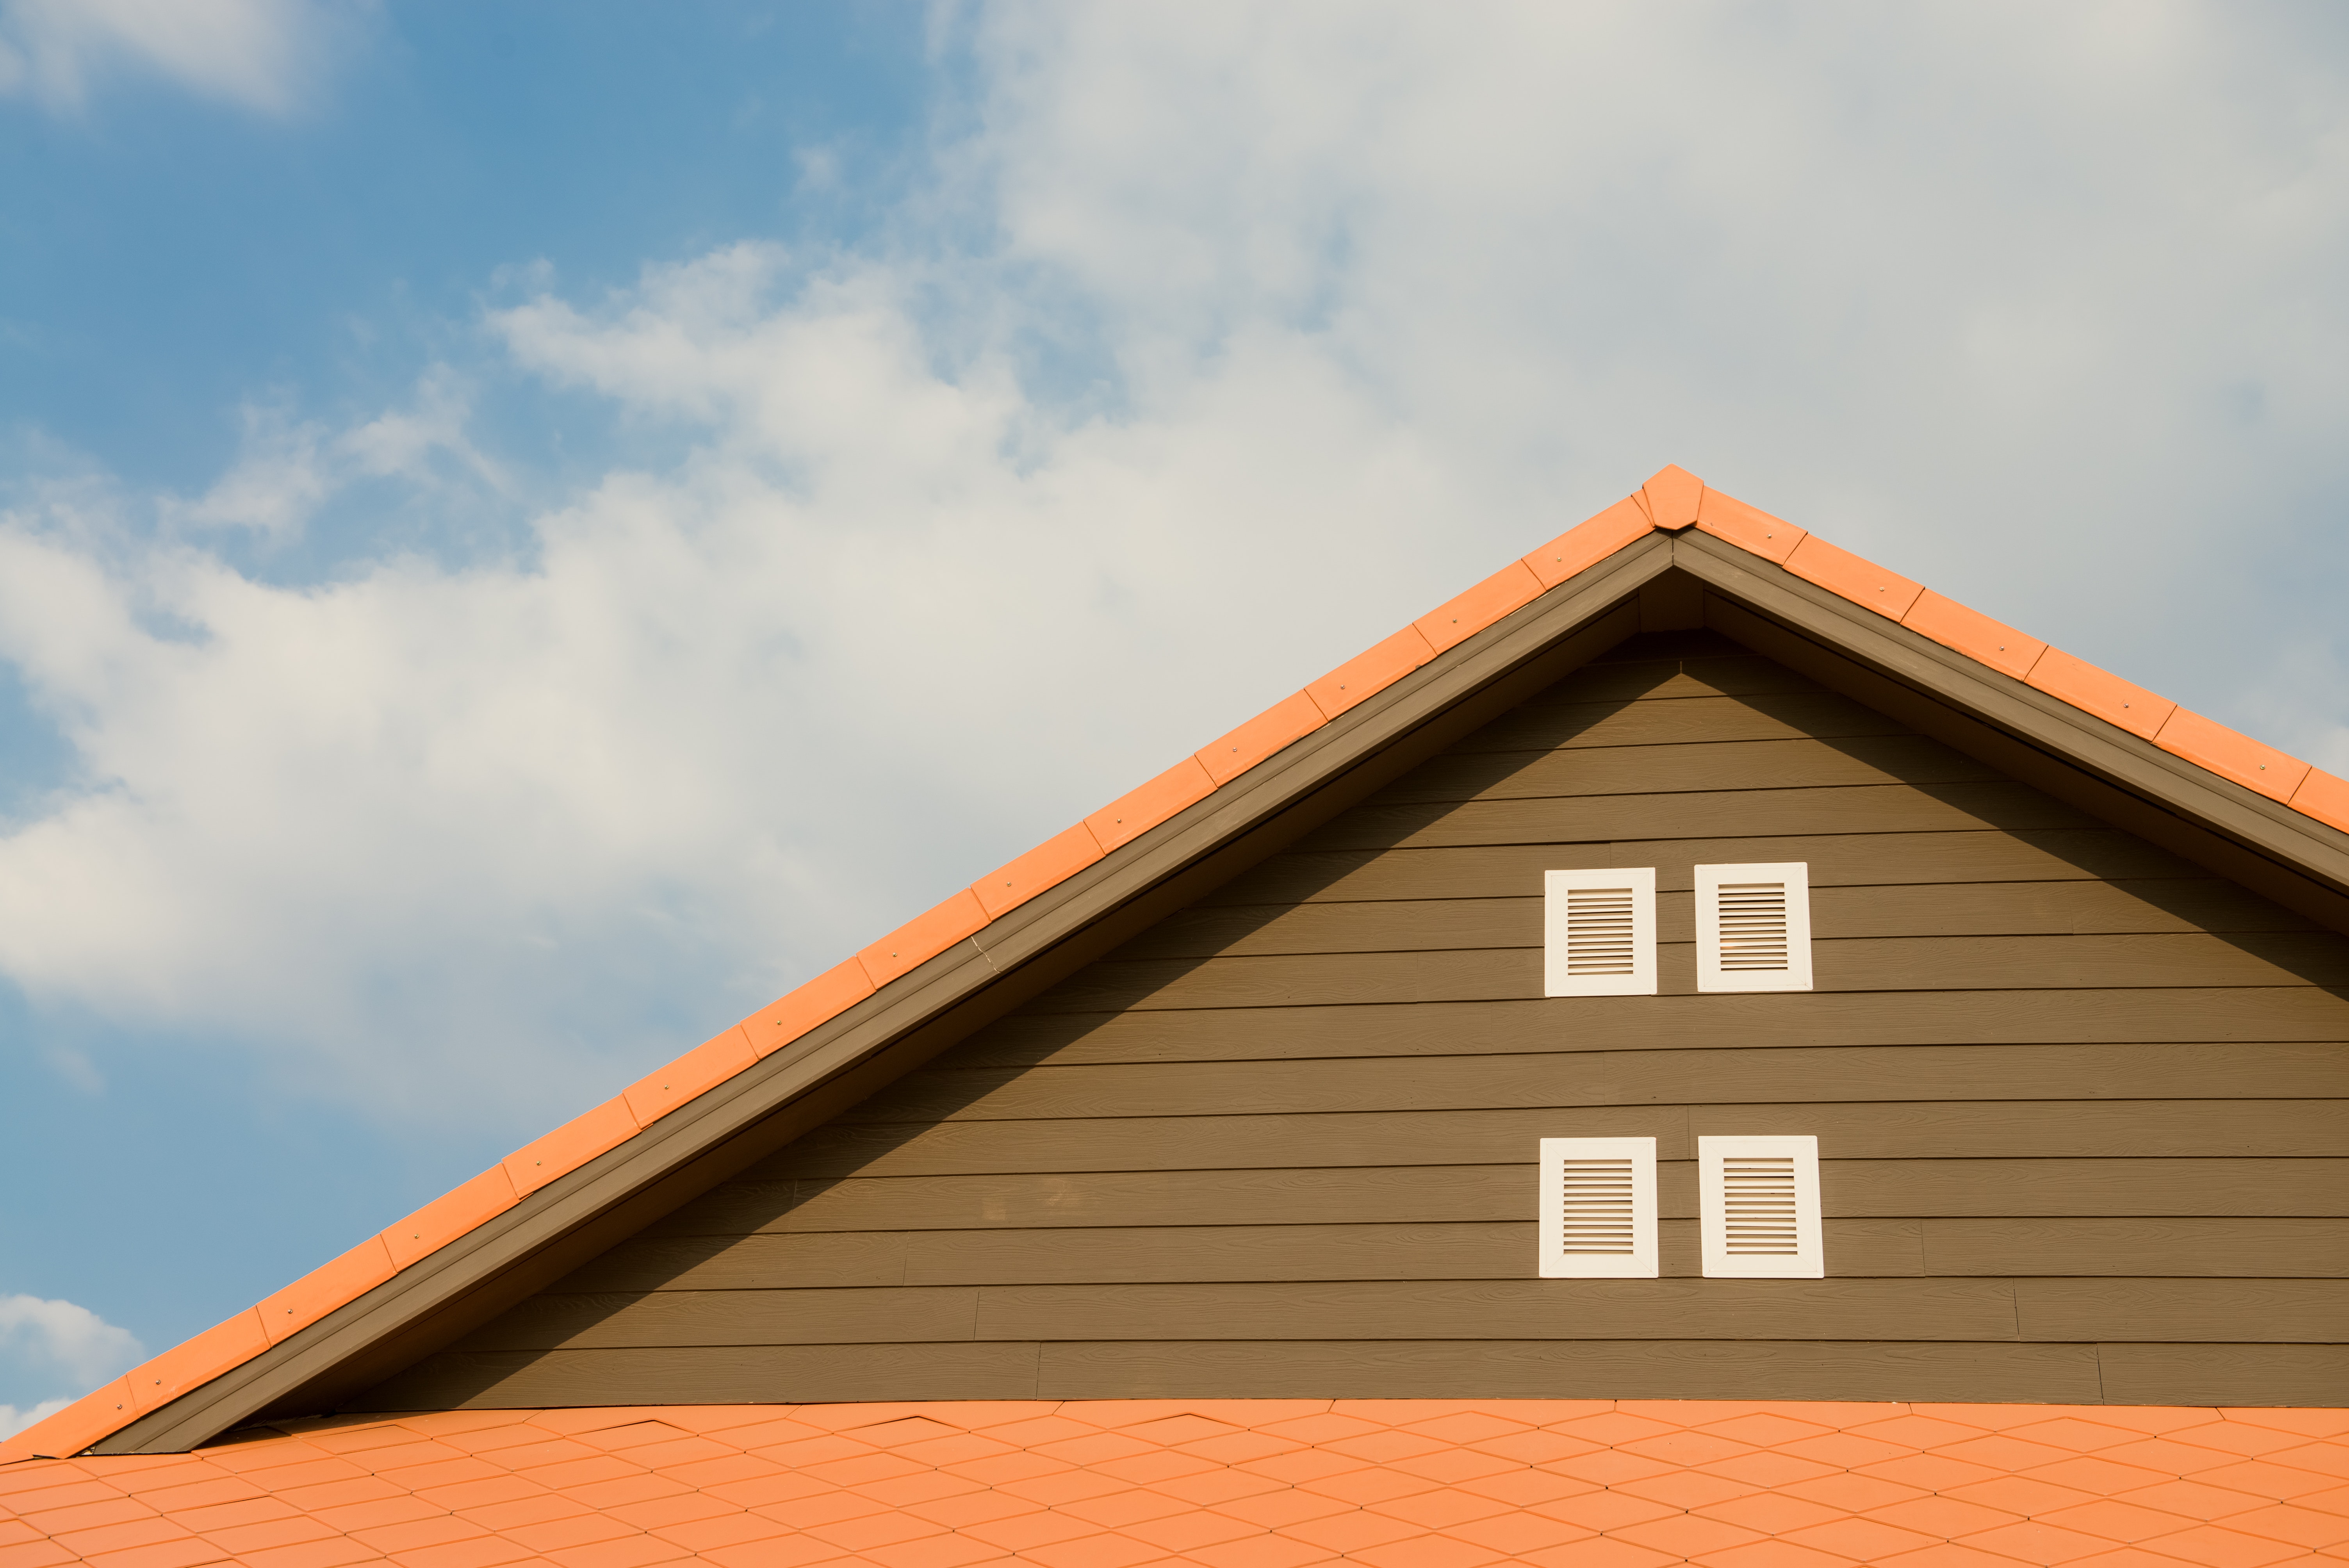 orange-and-gray-painted-roof-under-cloudy-347152.jpg